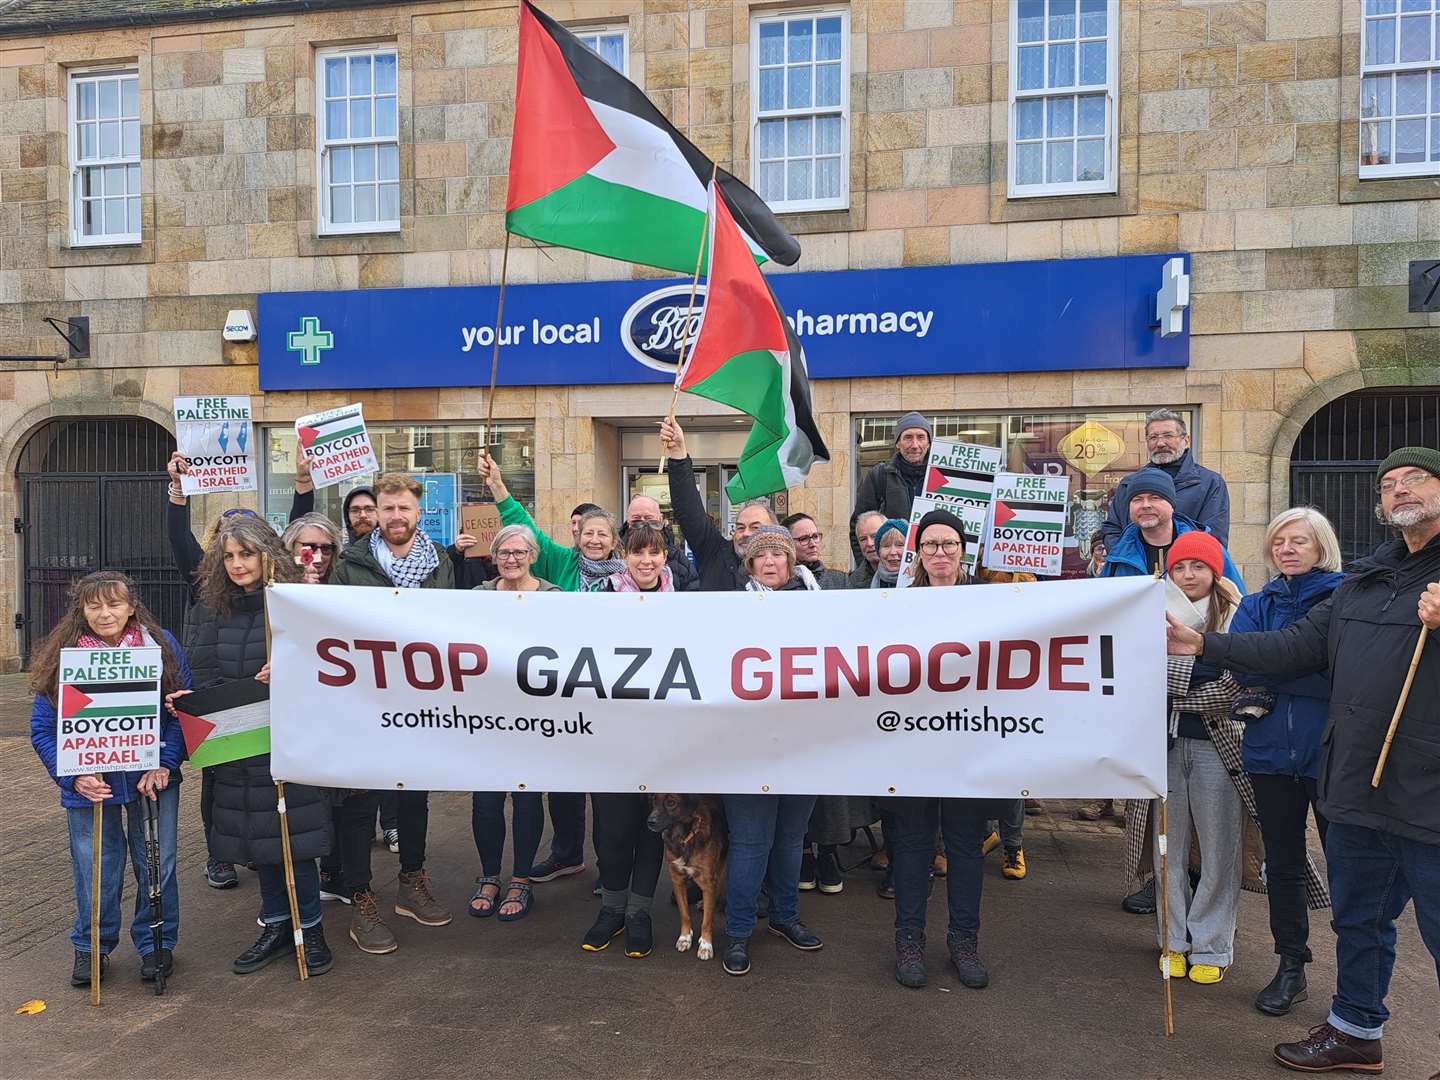 Demonstrators gathered on Forres High Street to call for an immediate ceasefire in Gaza.